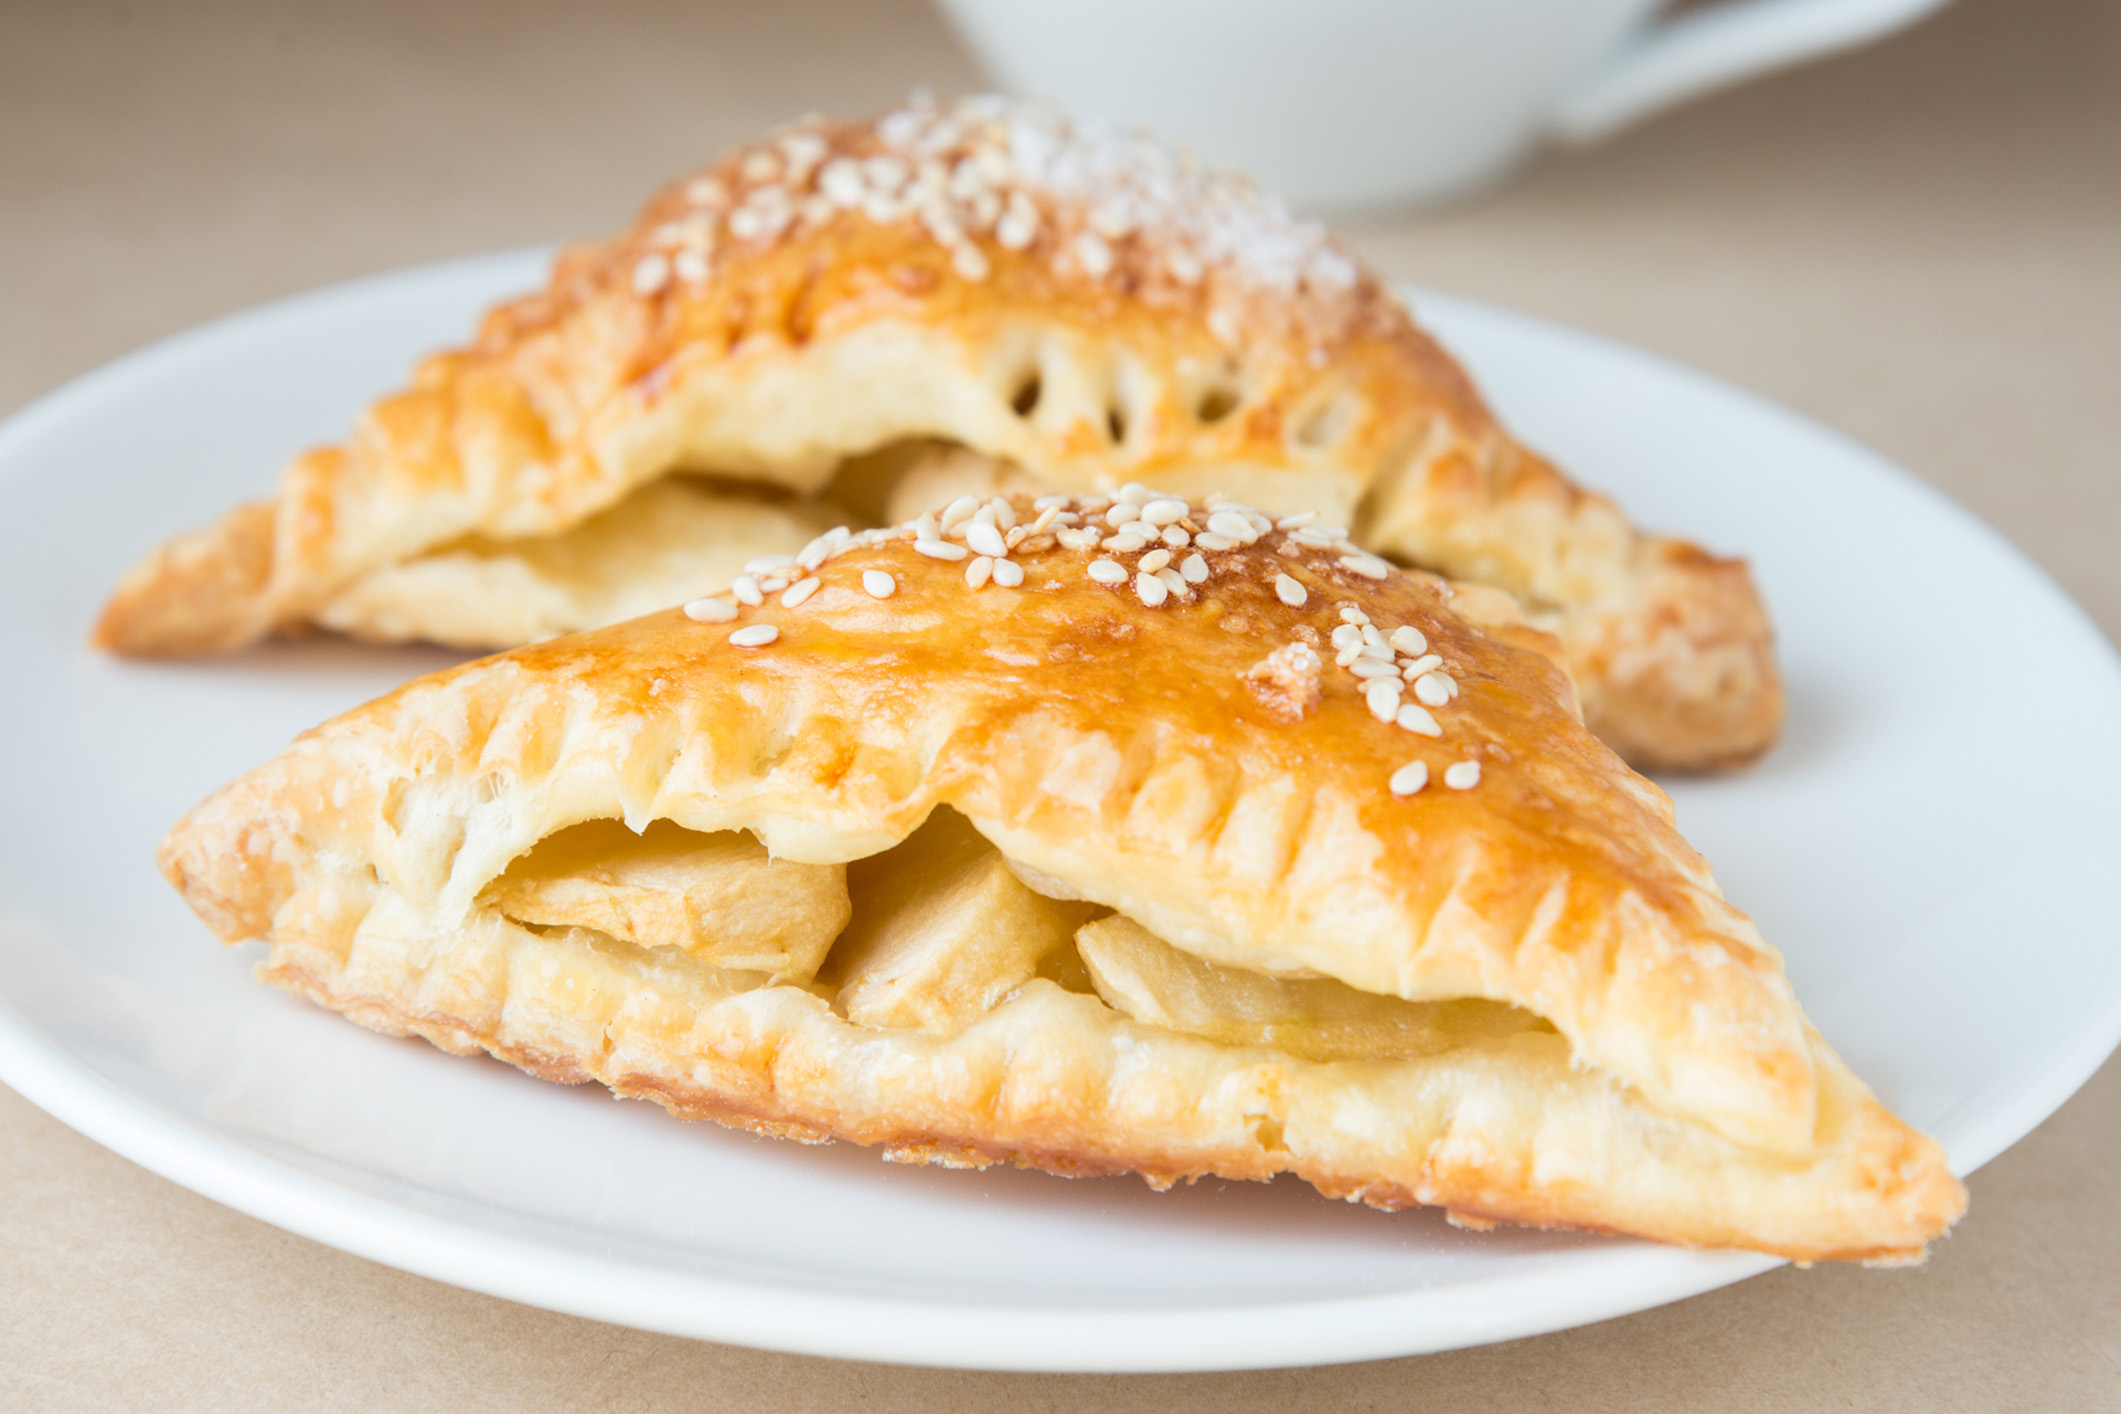 two halves of Apple Turnovers on a plate